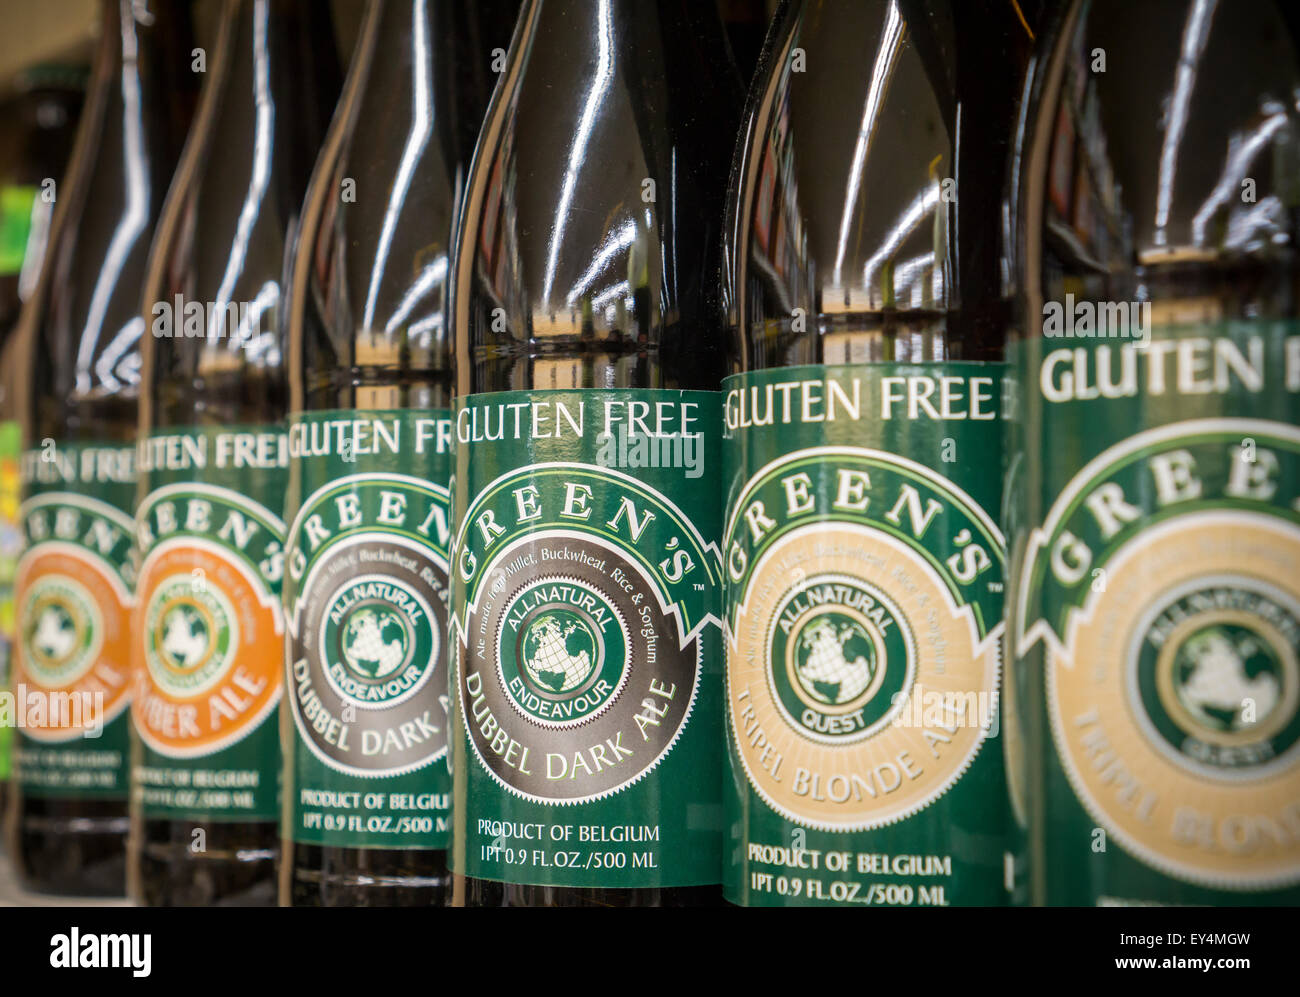 Bottles of Green's gluten free beer, a product of Belgium, are seen in a grocery store in New York on Friday, July 17, 2015. (© Richard B. Levine) Stock Photo